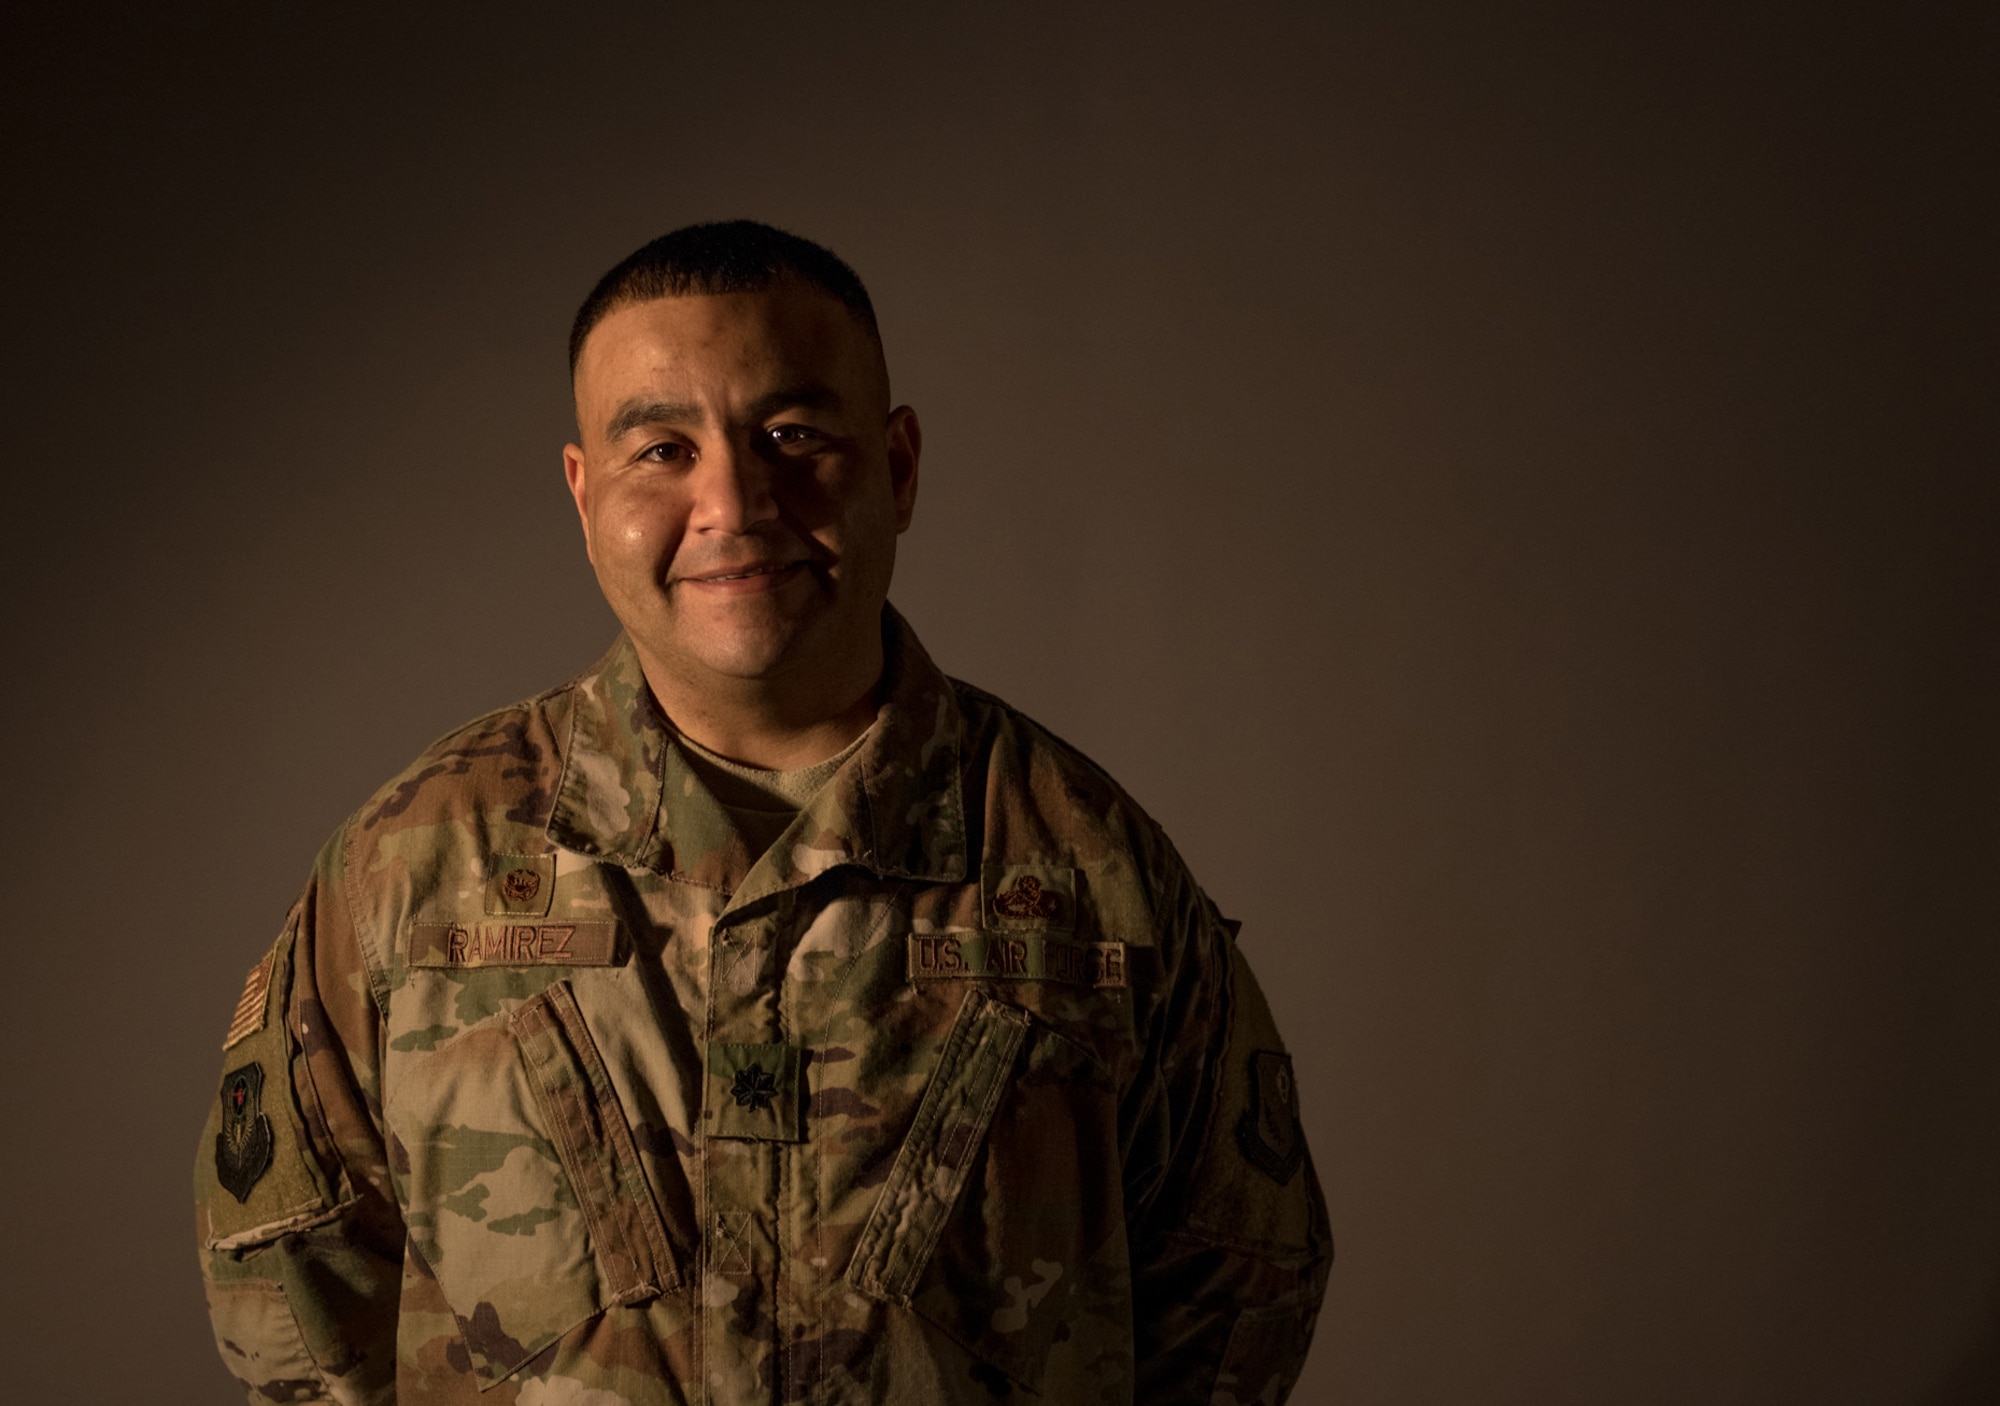 U.S. Air Force Lt. Col Jaime Ramirez, commander of the 193rd Special Operations Maintenance Squadron, Pennsylvania Air National Guard, pauses for a portrait January 13, 2019, at the 193rd Special Operations Wing in Middletown, Pennsylvania. Ramirez has served more than 25 years in the military to date. (U.S. Air National Guard photo by Staff Sgt. Rachel Loftis)